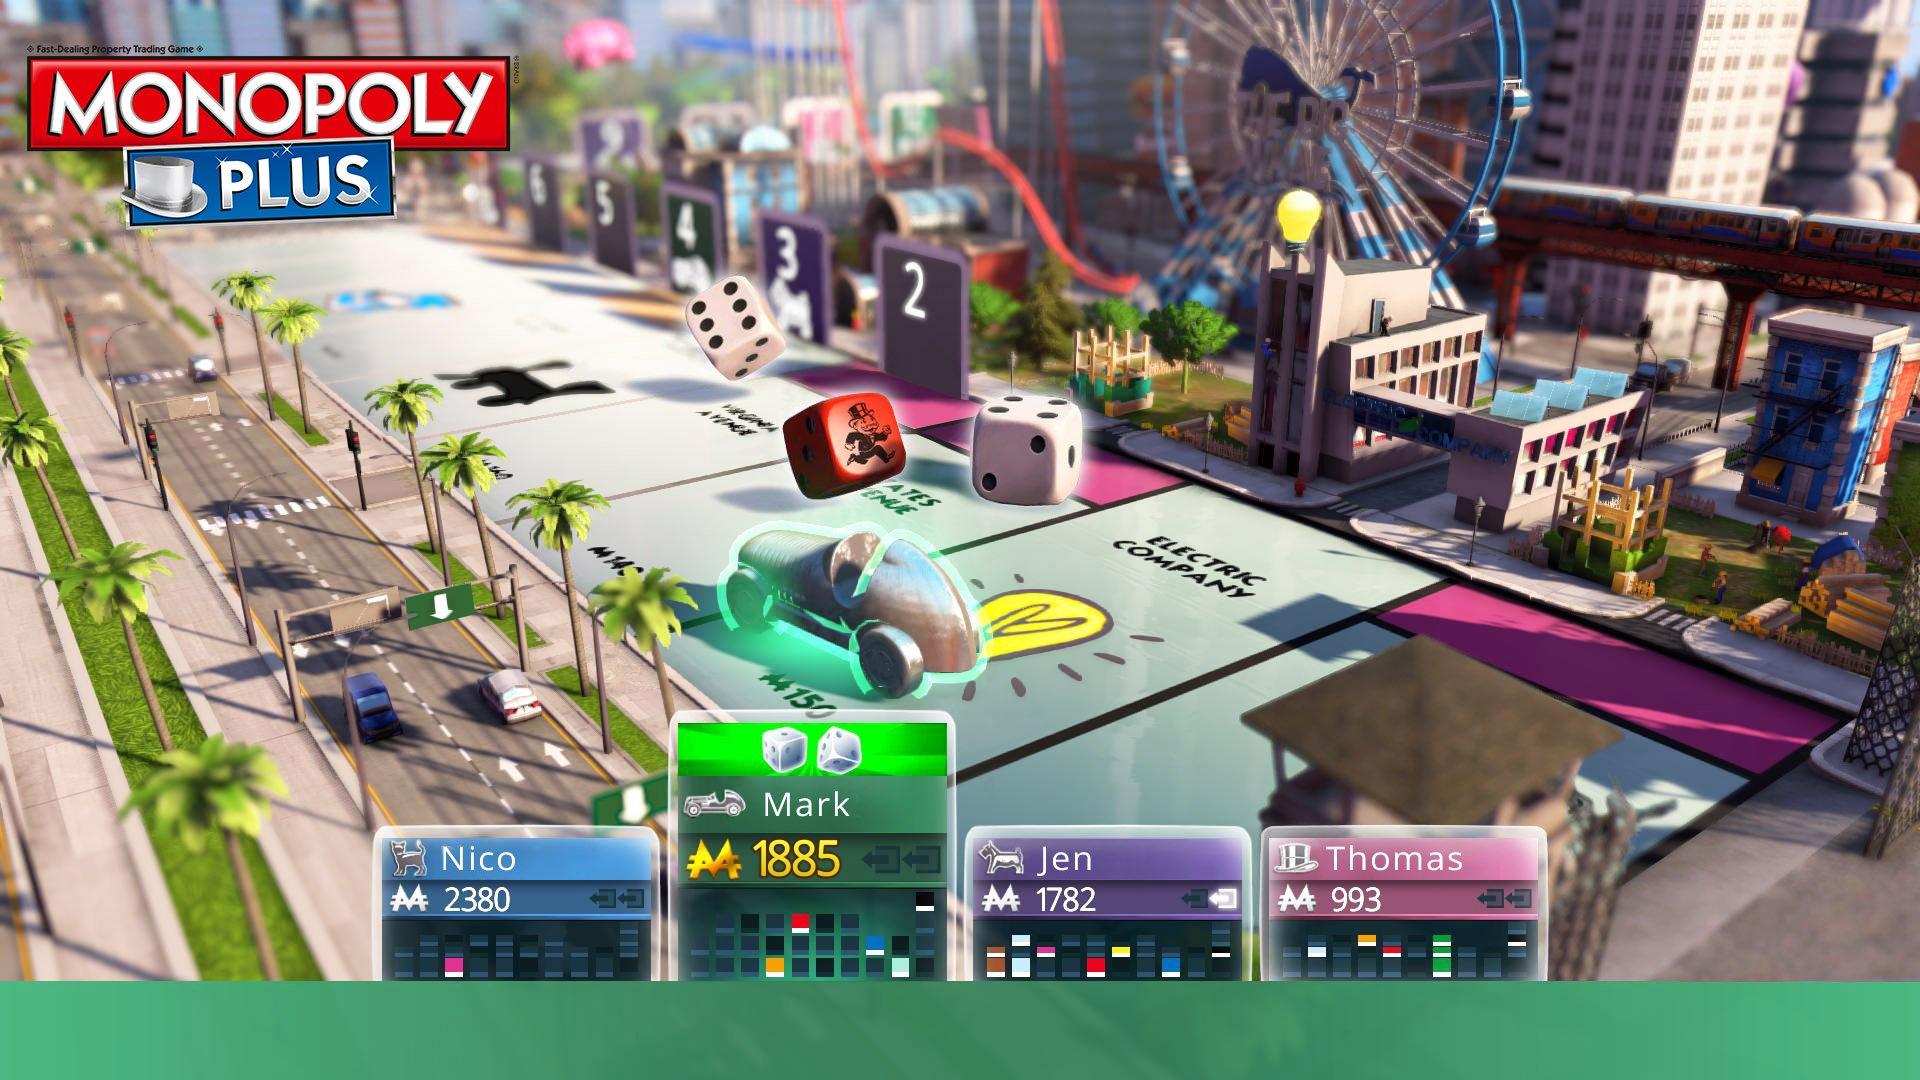 Monopoly Family Fun Pack - PlayStation 4